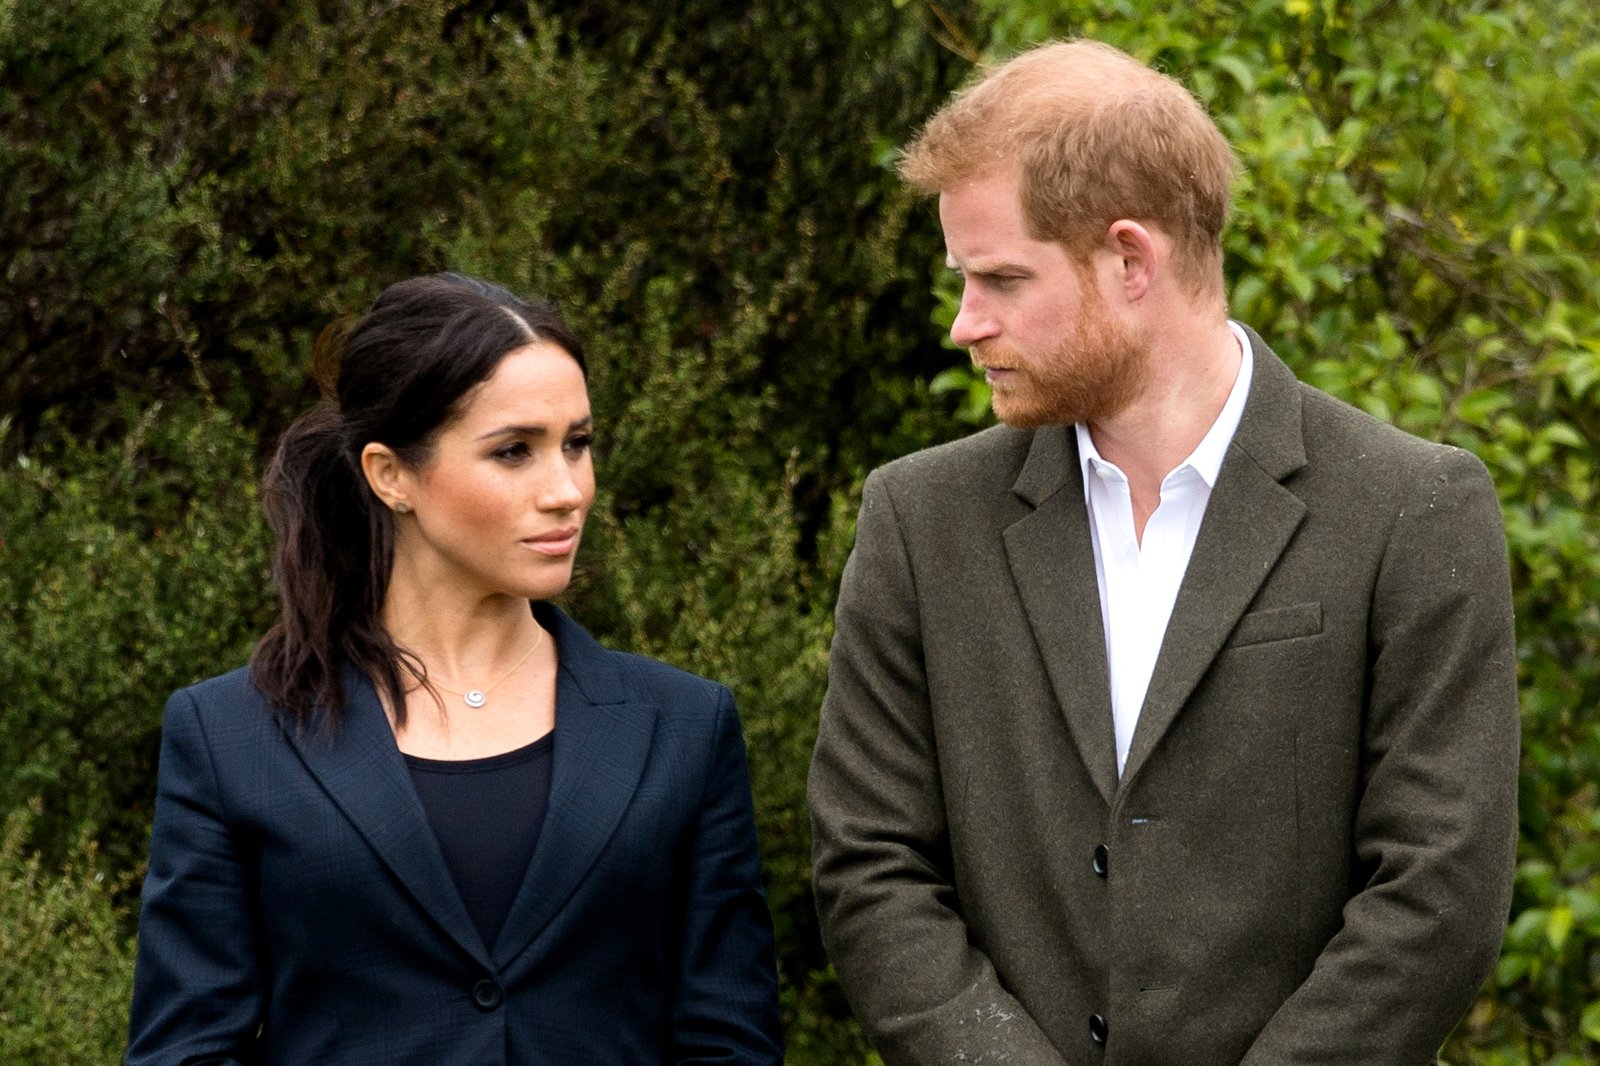 Prince Harry and Meghan's deal with Spotify ends as they agree to 'part ways'